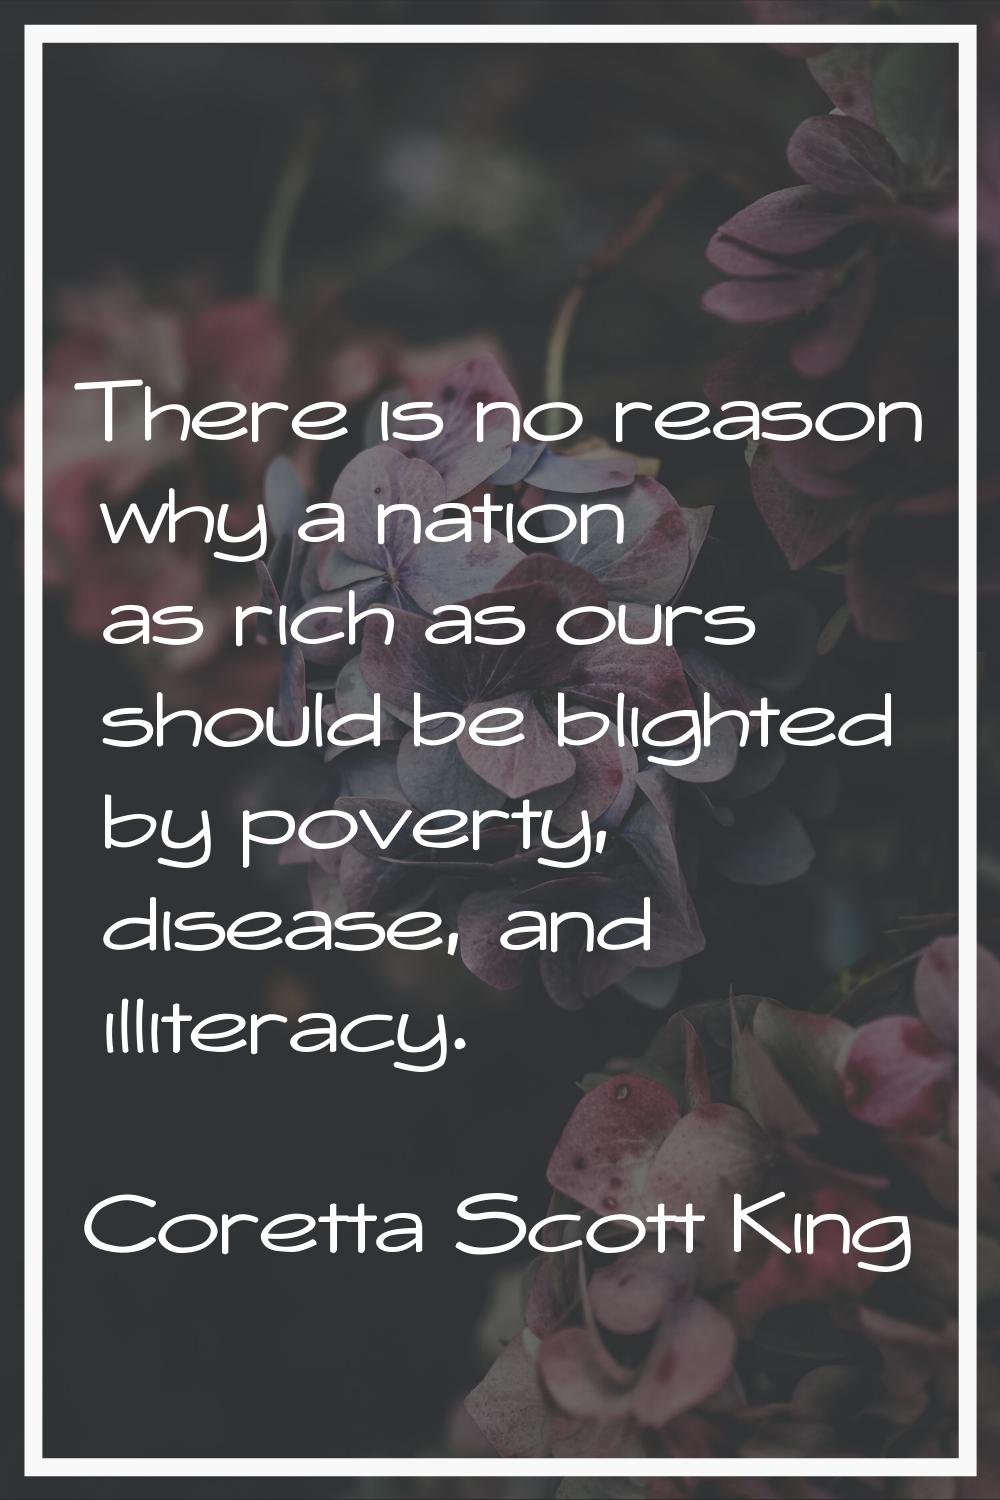 There is no reason why a nation as rich as ours should be blighted by poverty, disease, and illiter